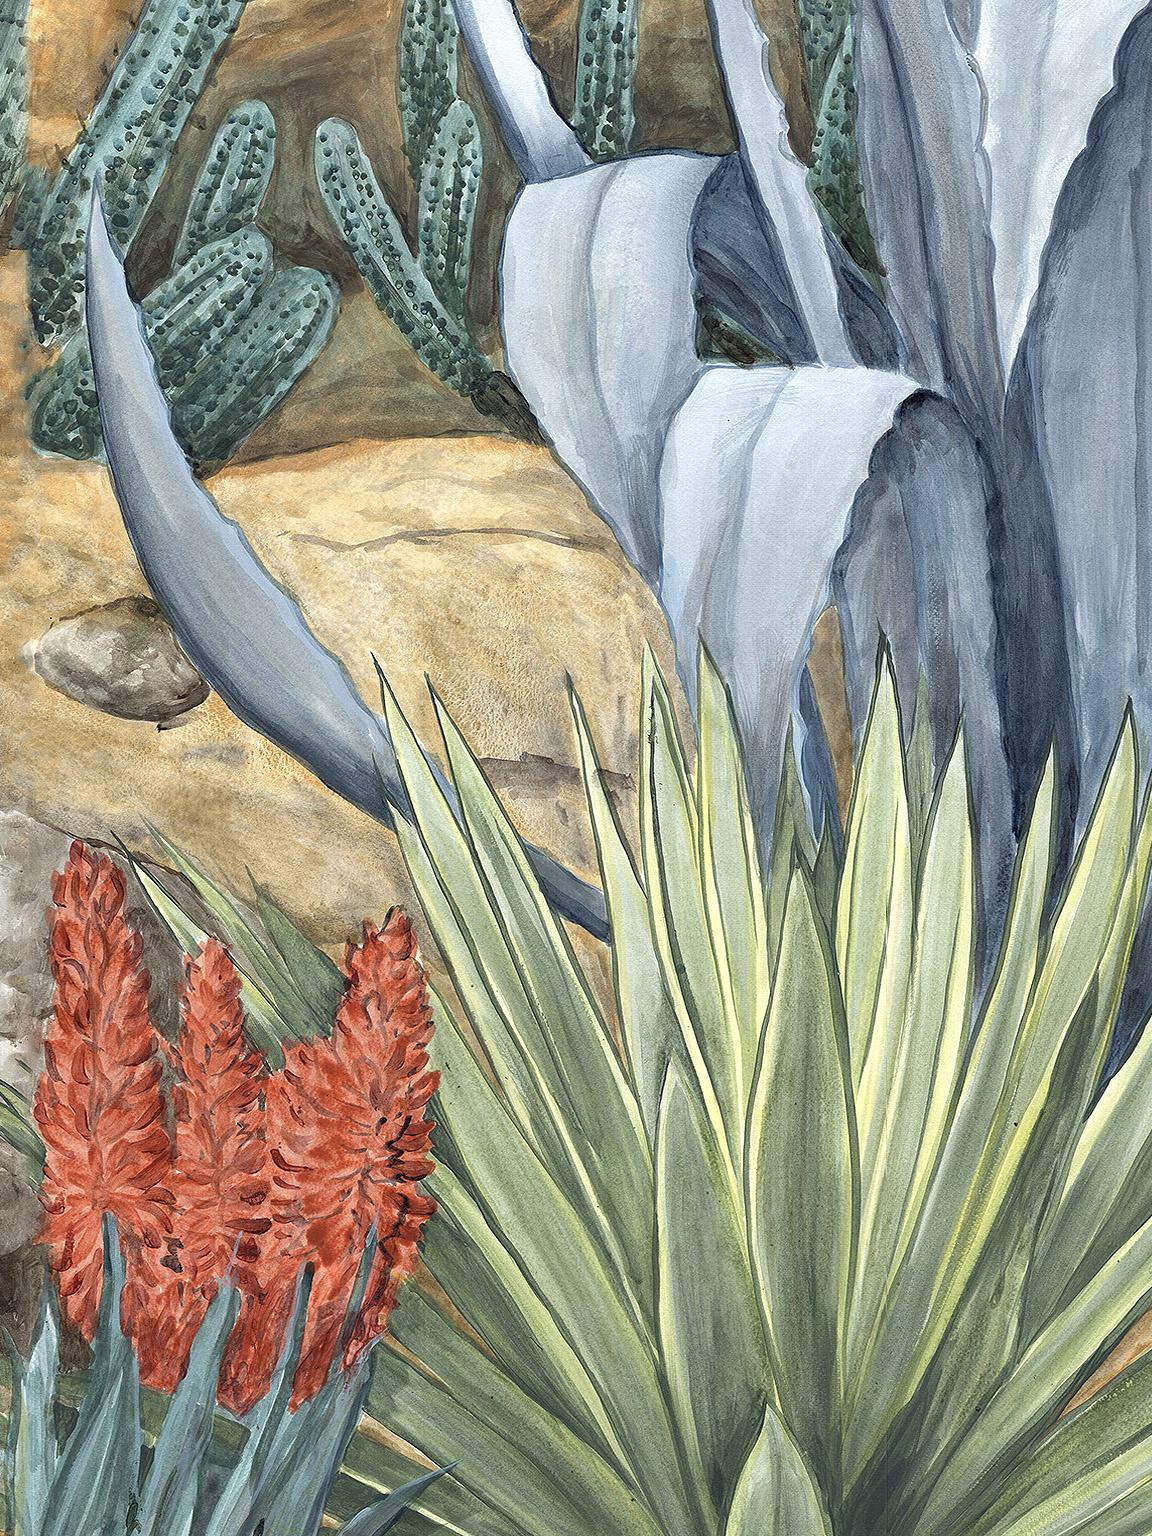 Desert Garden is a collection of 5 panels of desert plants arrayed in a bountiful display. The mural is painted with acrylic on water color paper. Each panels is 36? wide by 120? tall. Total mural is 15' (180?) wide by 10' (120?) tall. If you wish